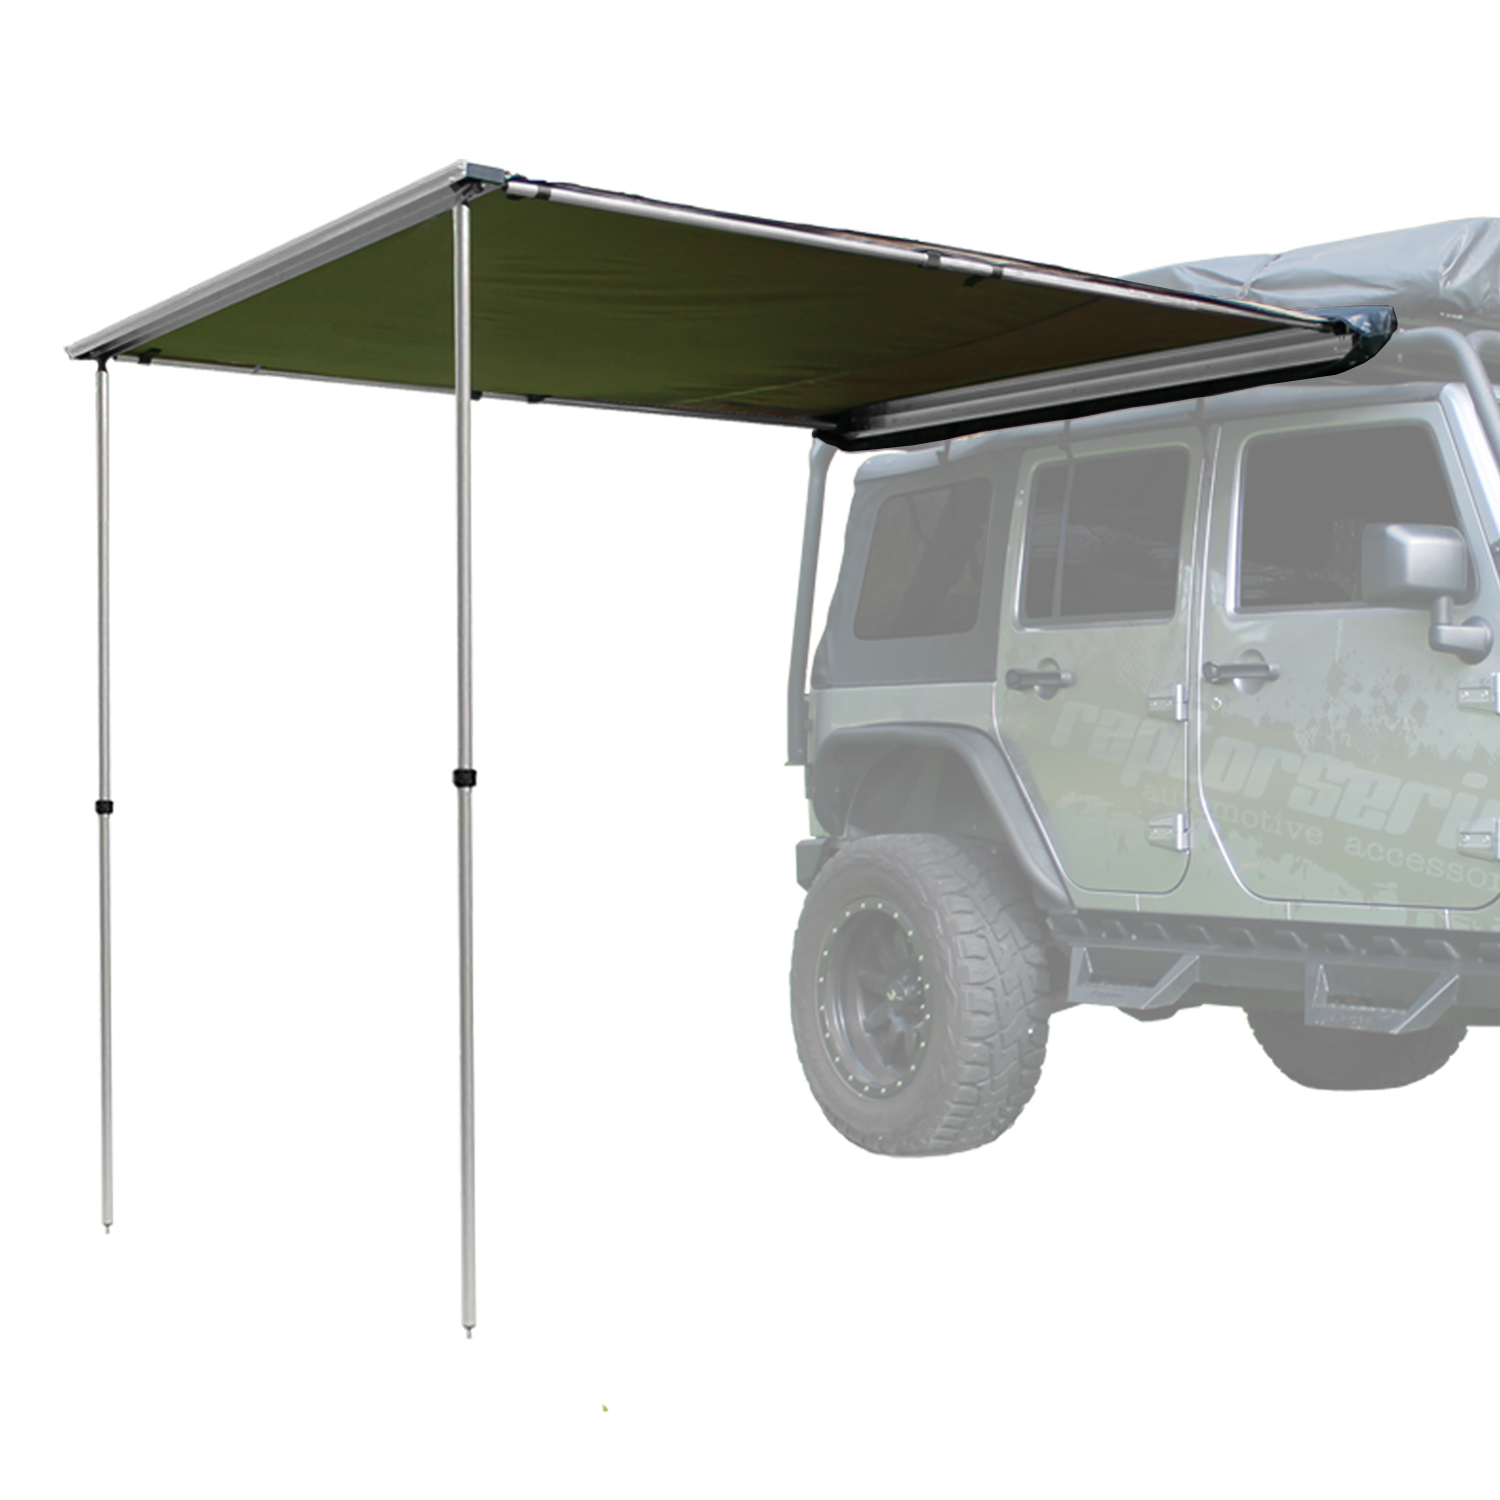 Raptor Series OffGrid Retractable Pull Out Roof Top Awning Sun Shade Shelter 8.2